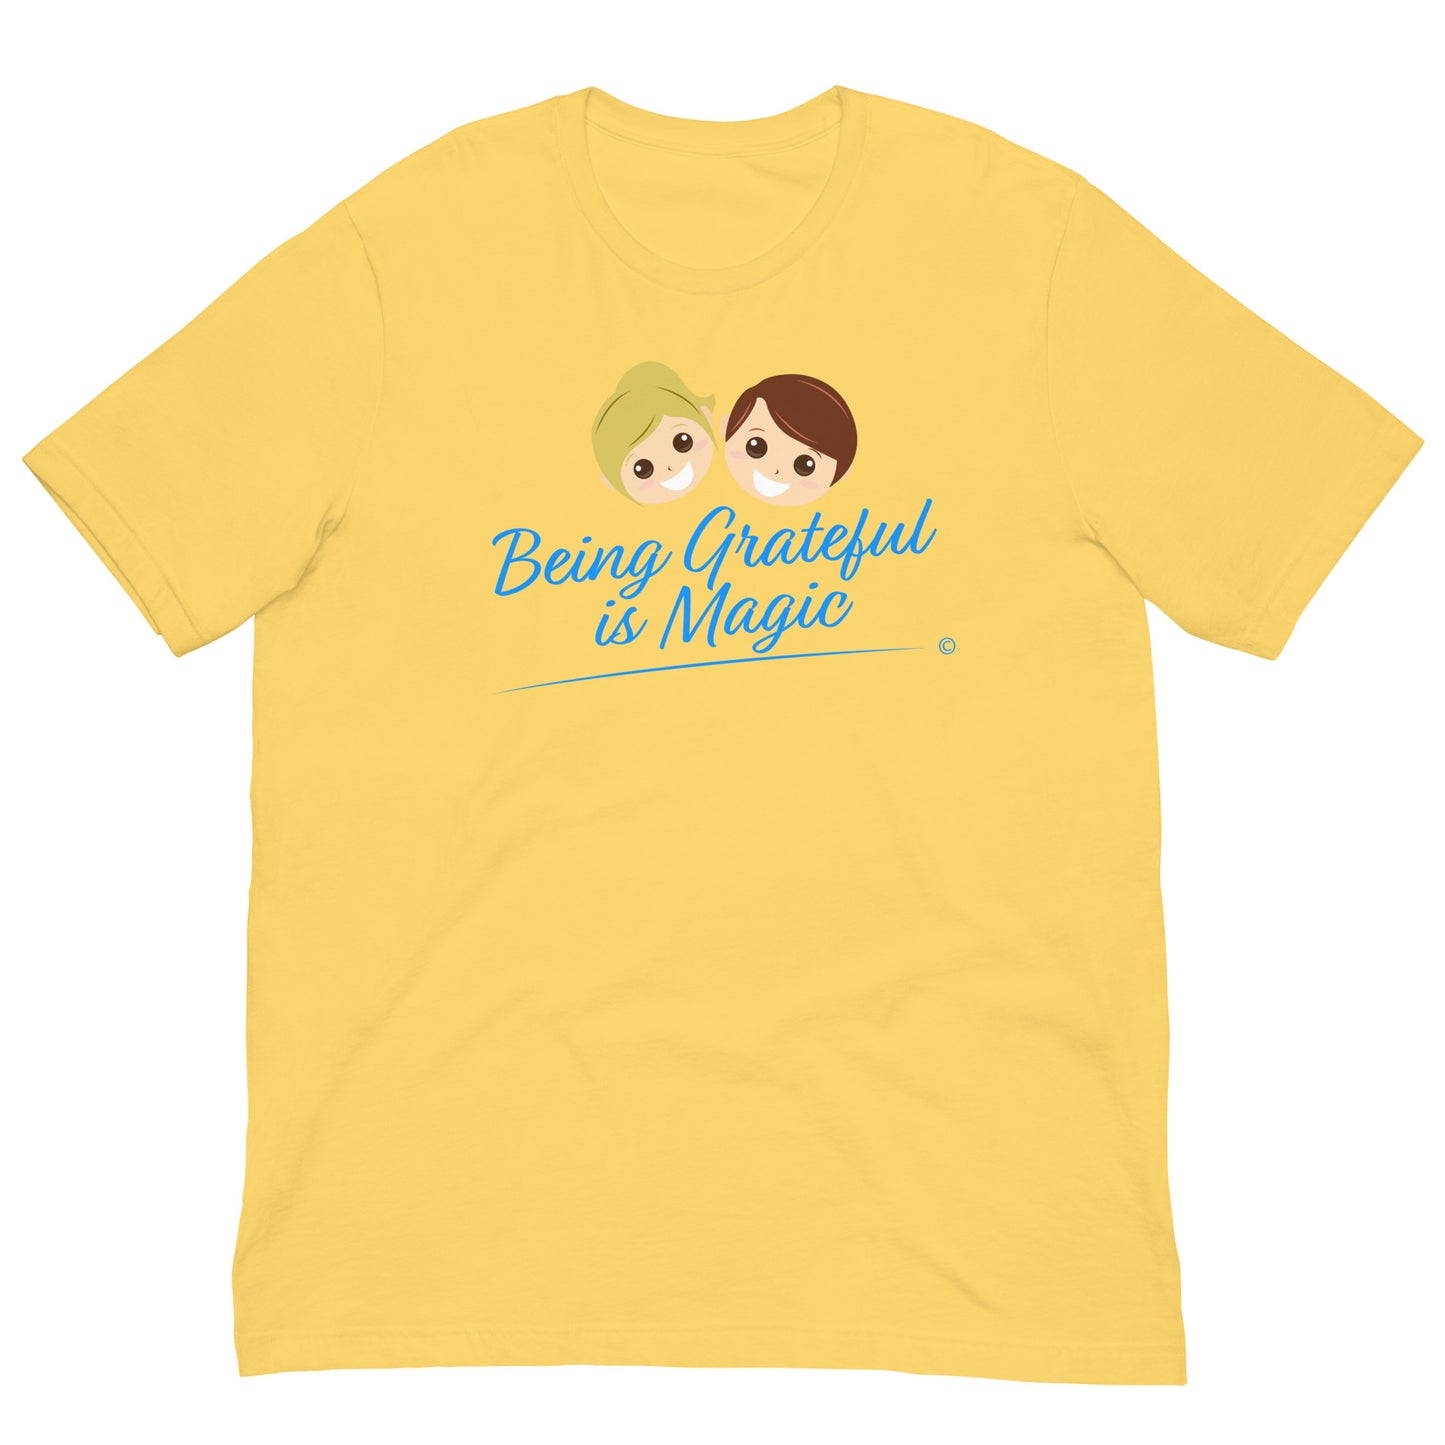 Lounge-worthy relaxed top - Yellow Unisex Shirt